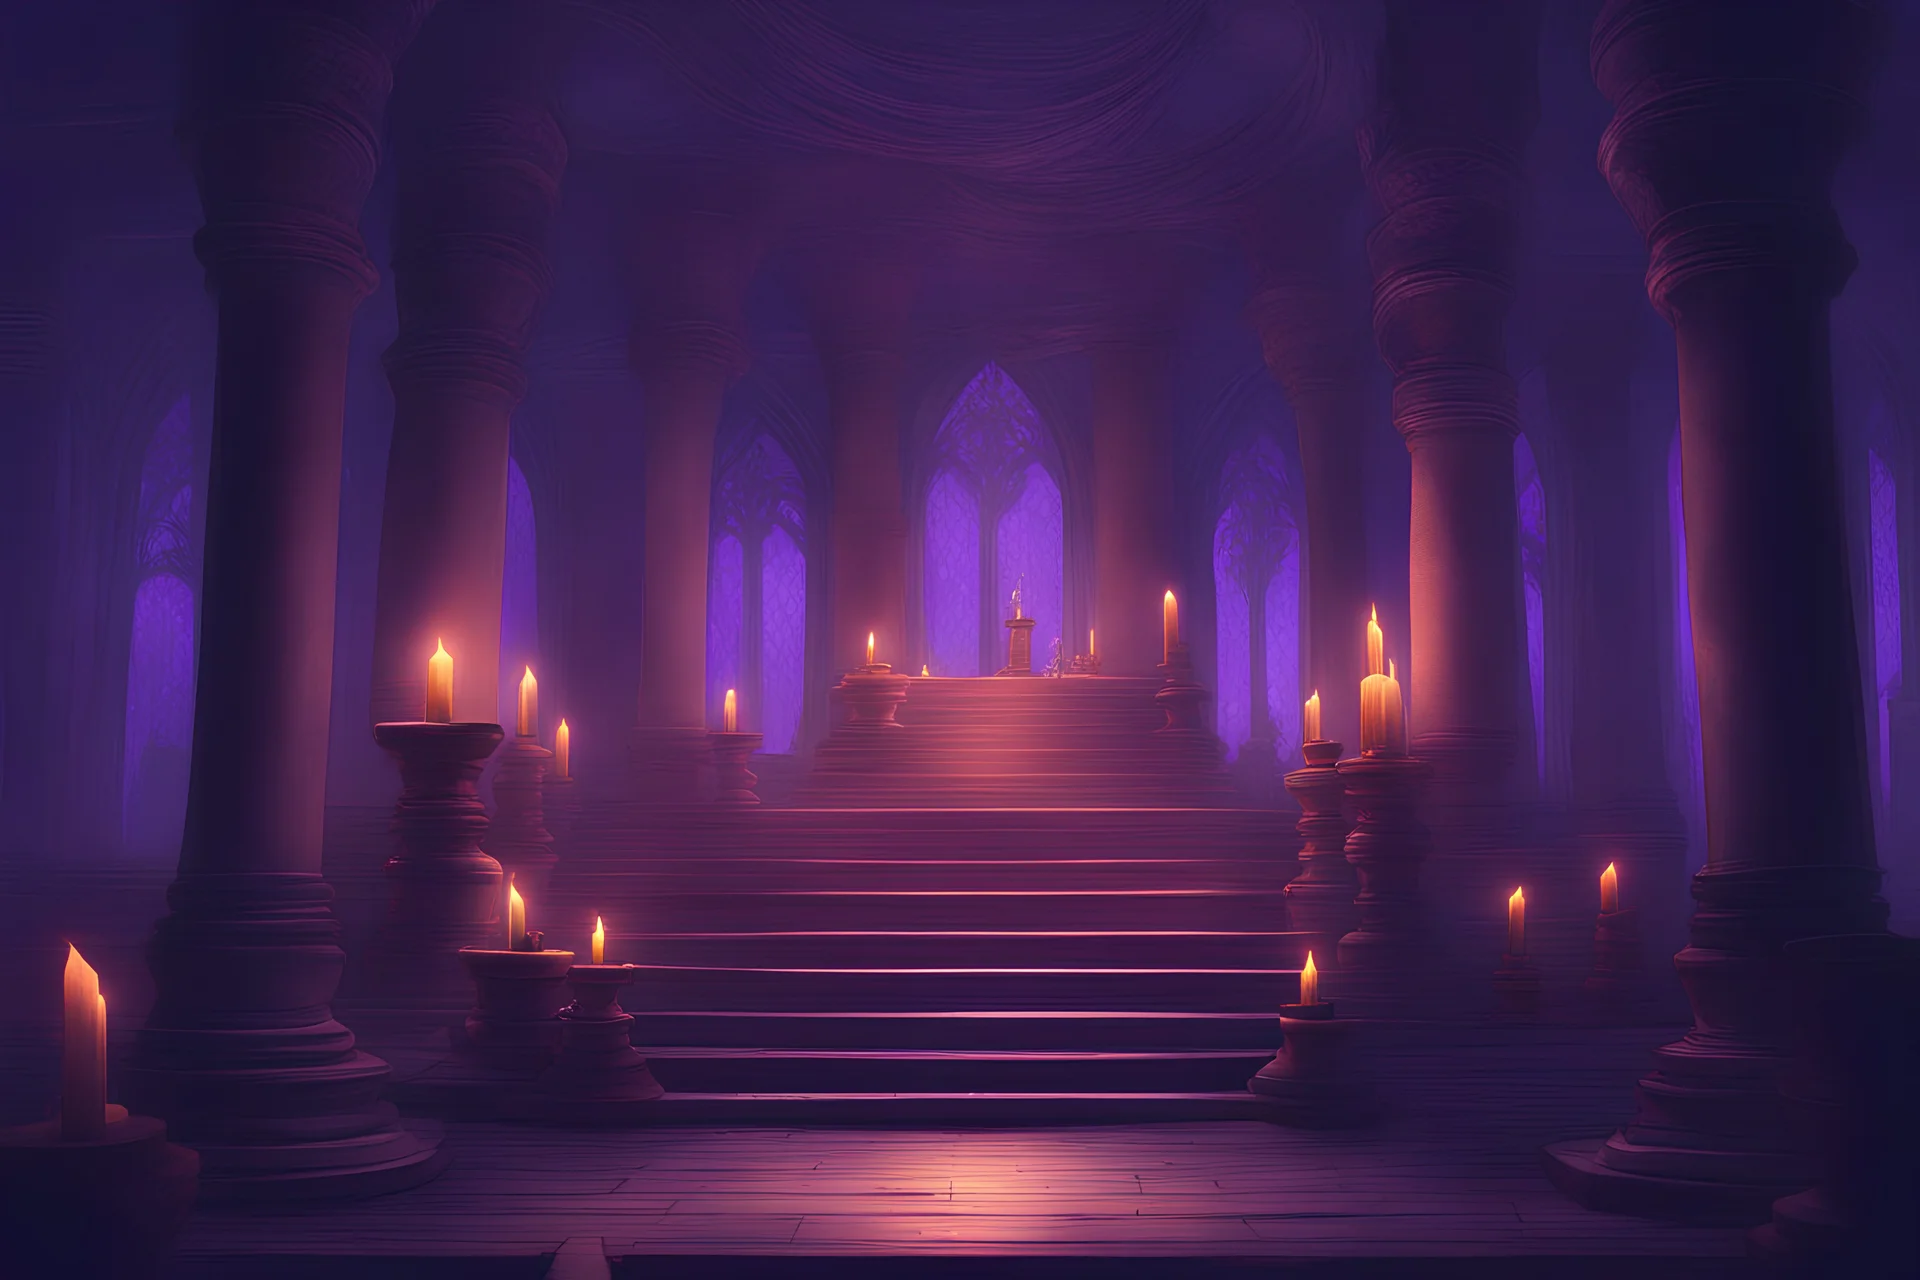 Artstation,concept art, Temple with candles and objects, deep and pleasant atmosphere, purple and indigo colors